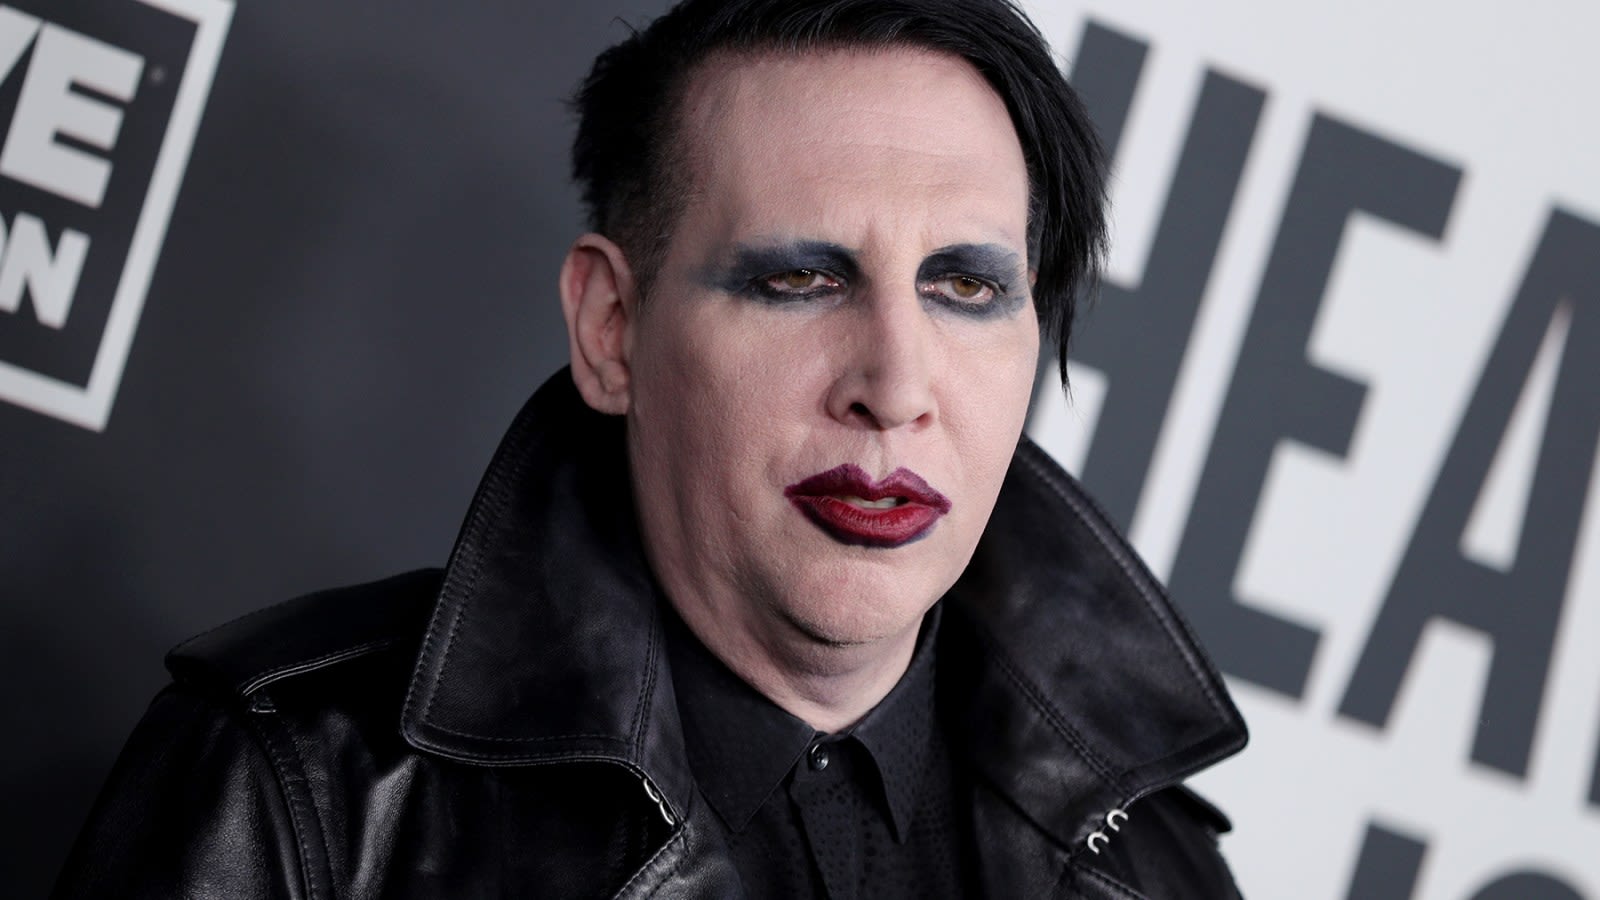 Marilyn Manson Accuser Gets Trial Date for Revived Claims of 'Horrific' Abuse